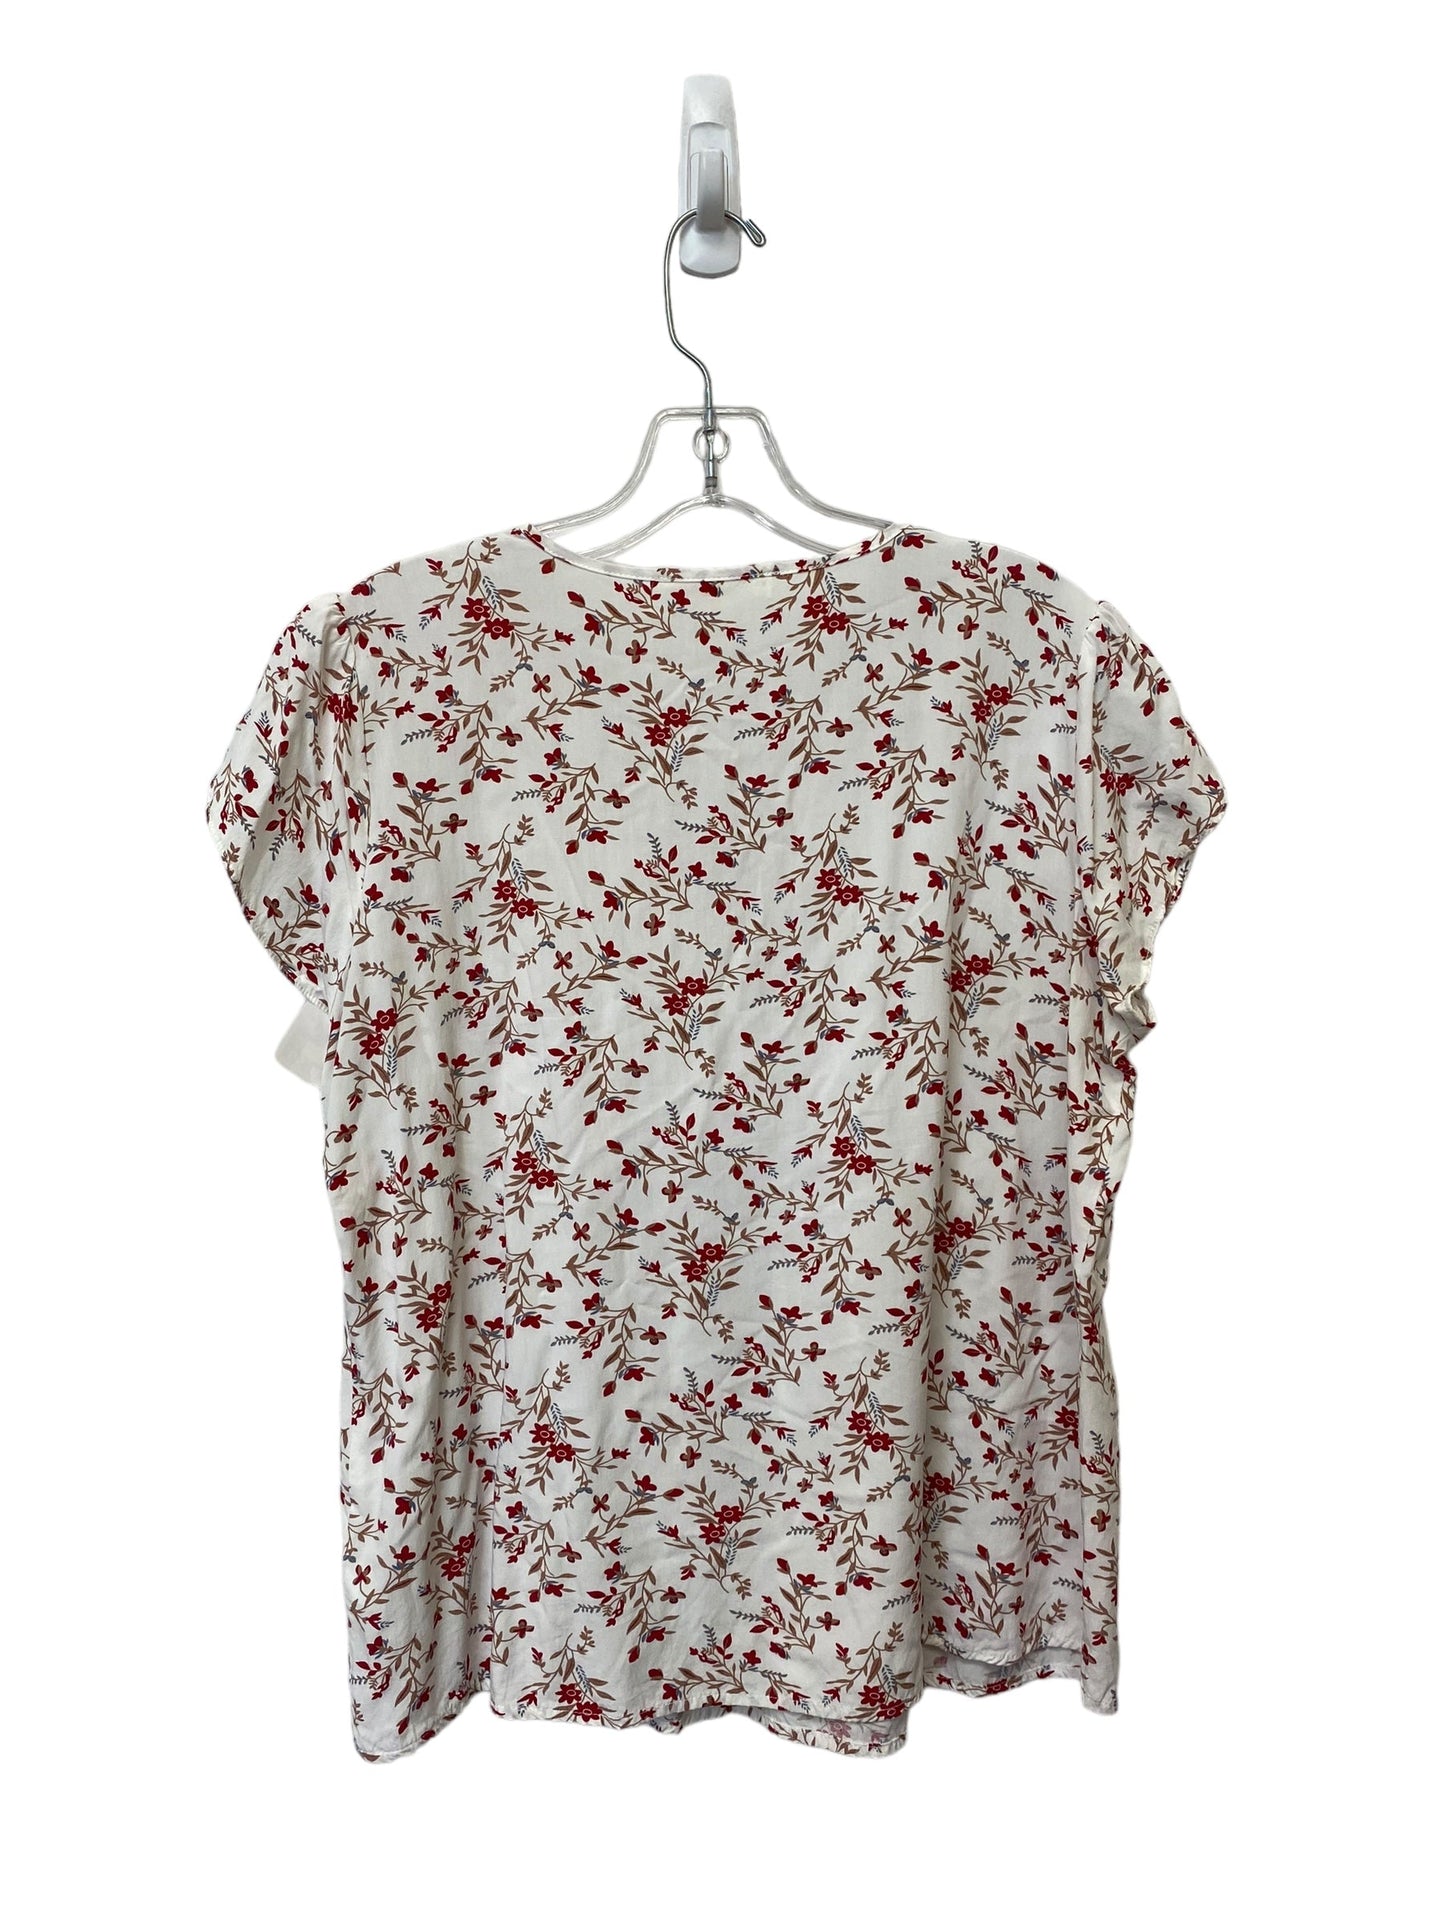 Floral Print Top Short Sleeve Clothes Mentor, Size M